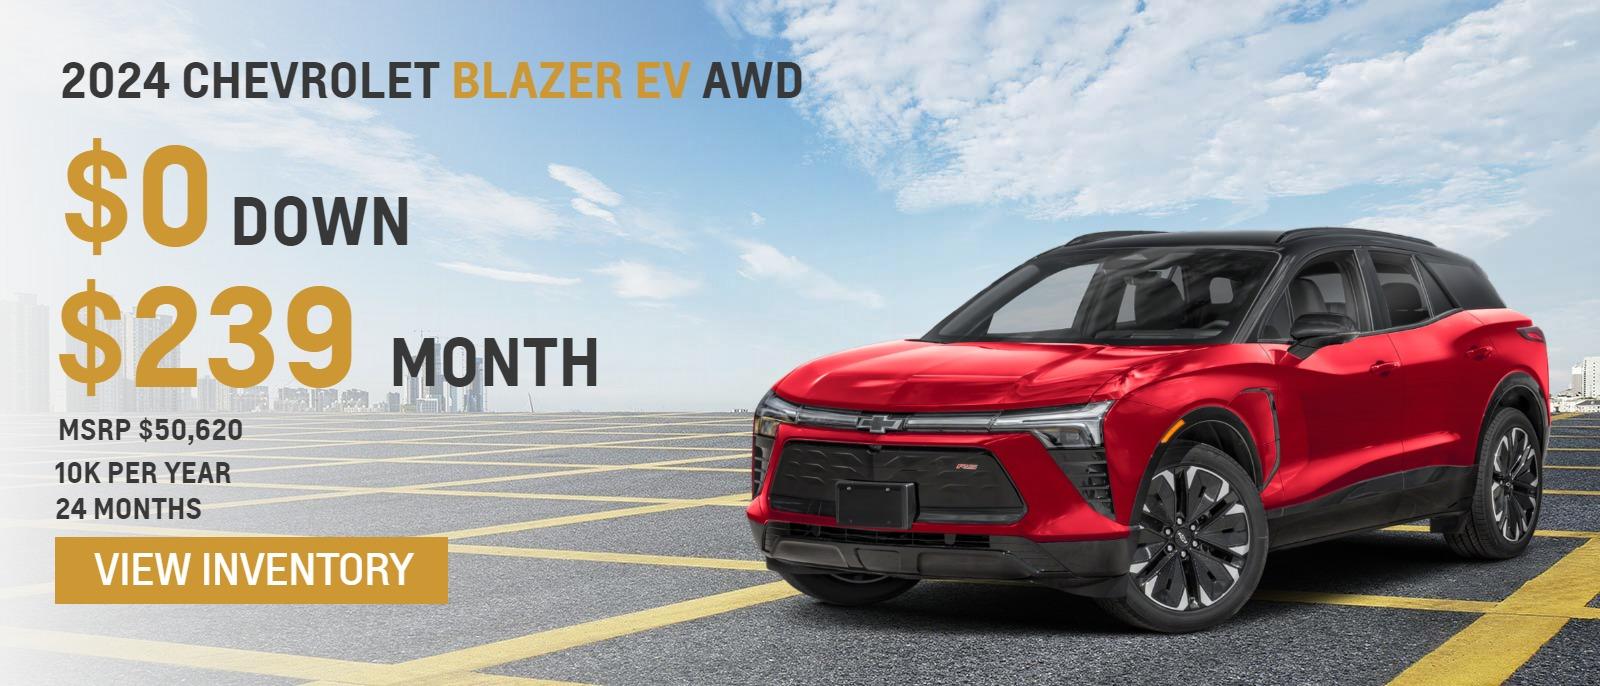 2024 Chevrolet Blazer EV AWD
MSRP $50,620.
10k per year
24 months
$239. month
sign and drive - taxes, bank fee and DMV down